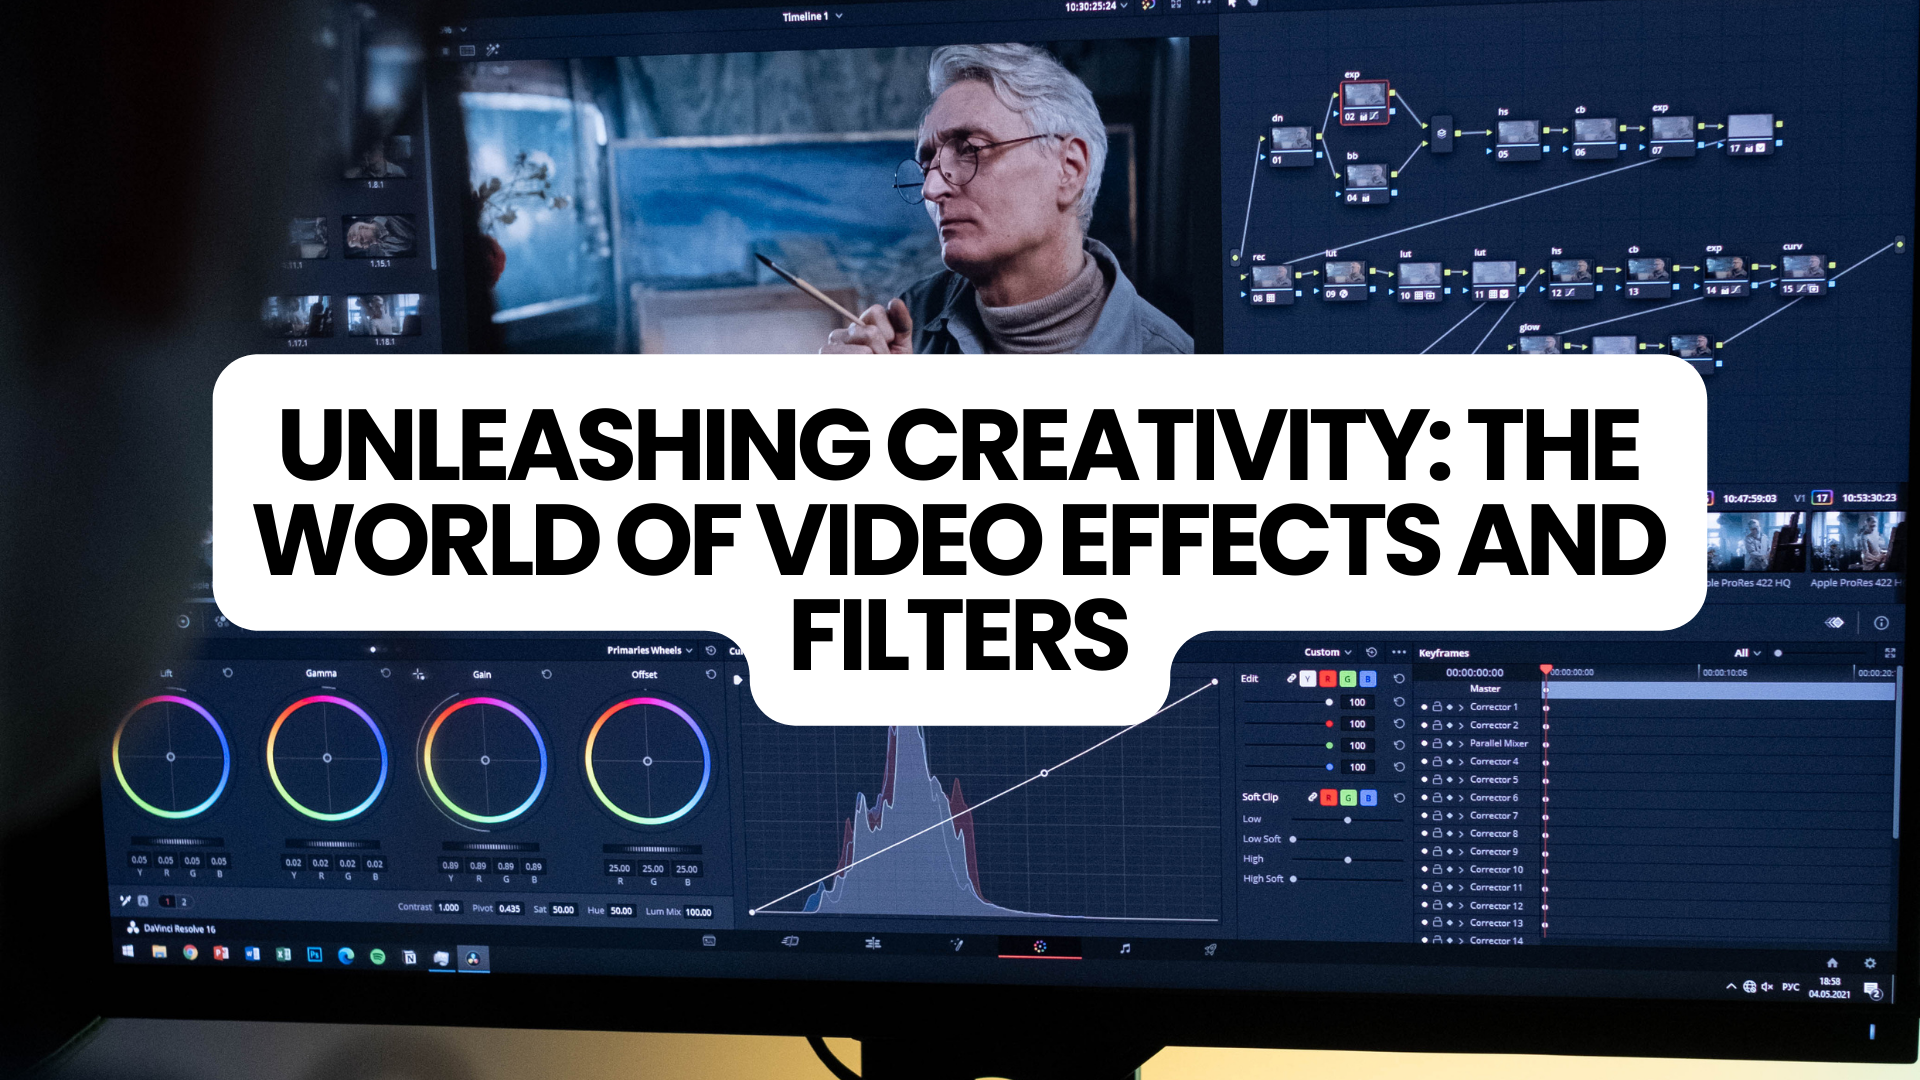 Explore the World of Video Effects and Filters